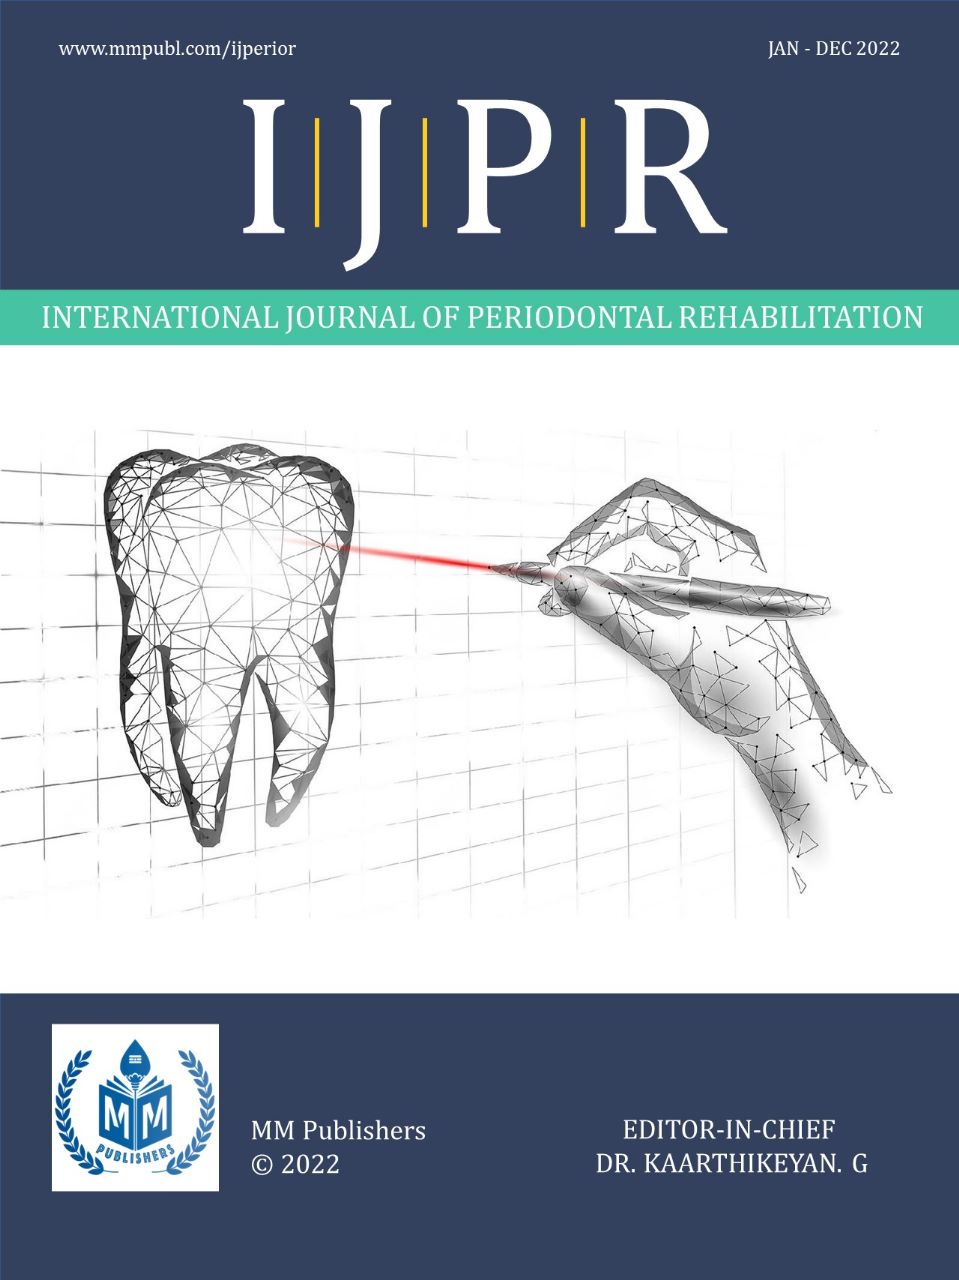 journal of periodontal research